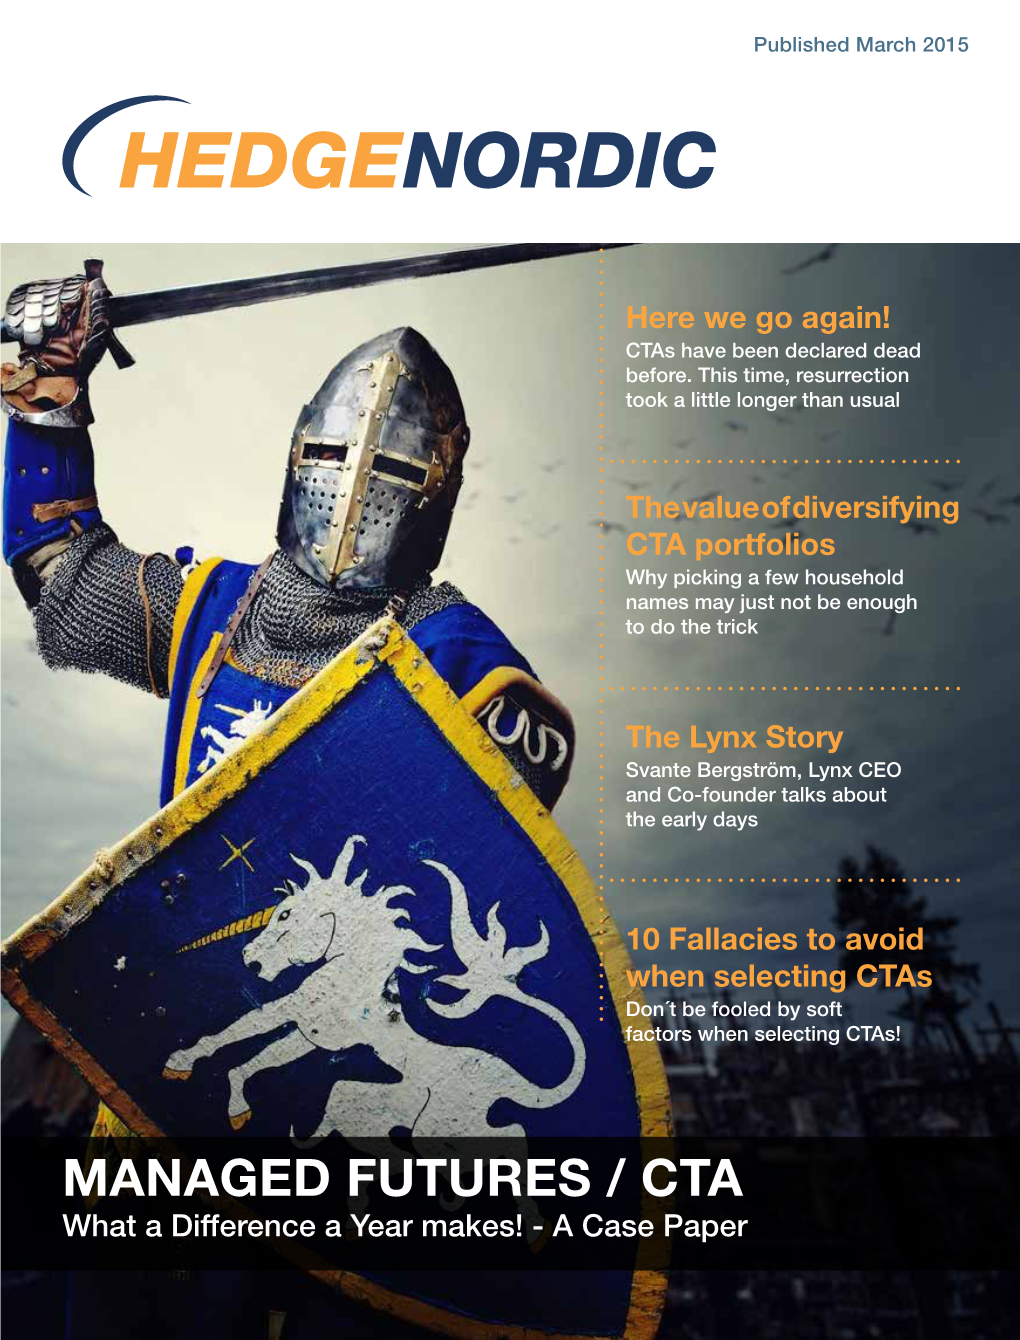 MANAGED FUTURES / CTA What a Difference a Year Makes! - a Case Paper “Your Single Access Point to the Nordic Hedge Fund Industry”